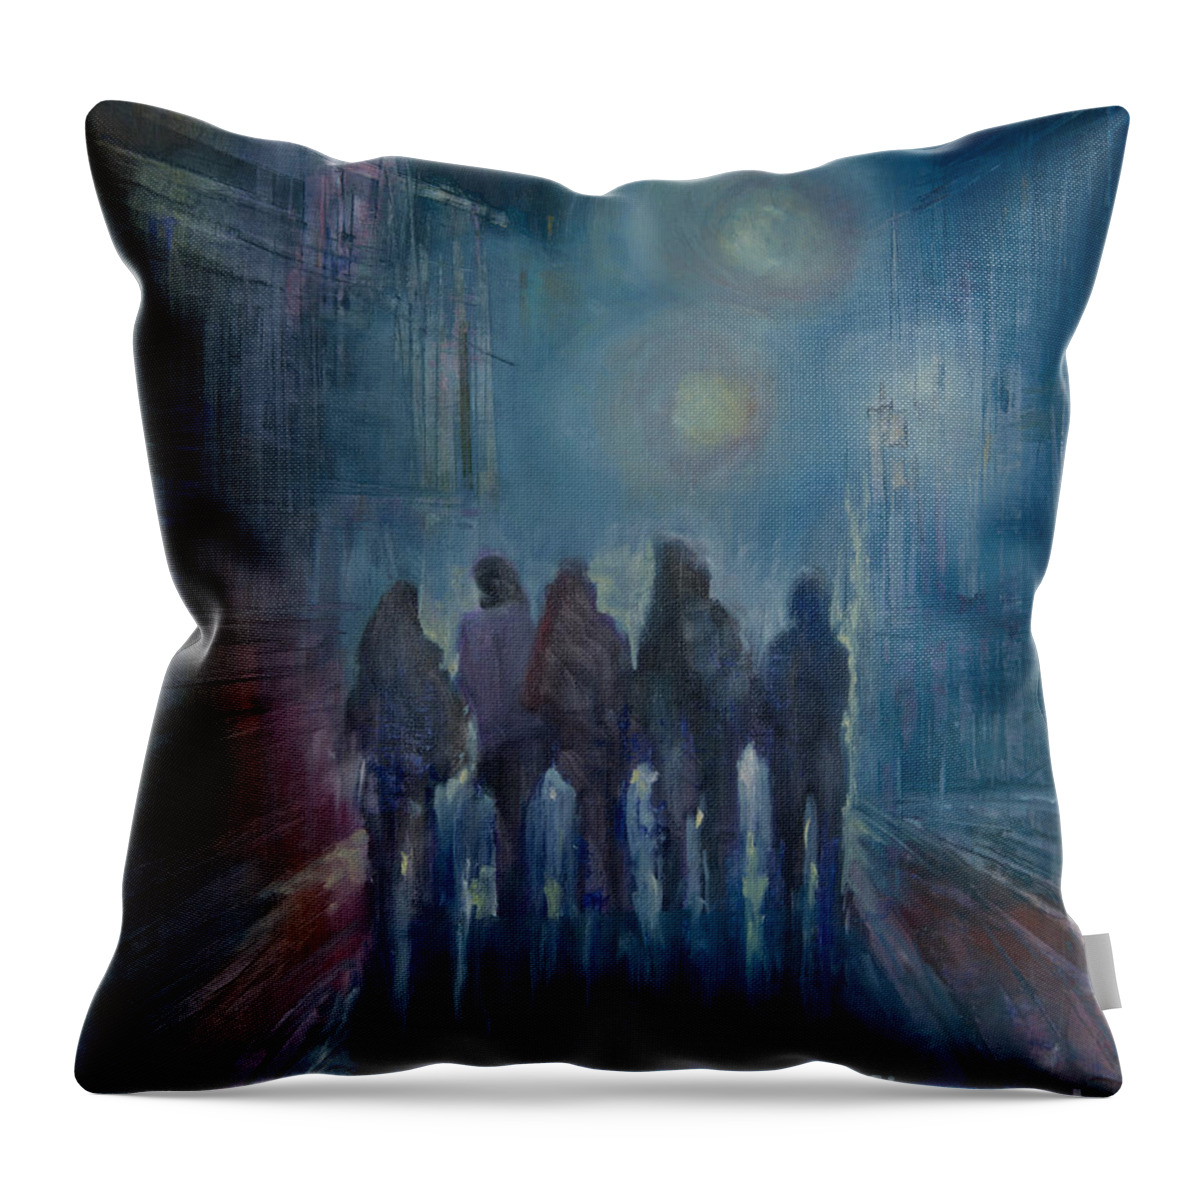 Friends Is A Night Painting Of A Group Of Five Friends Out For A Walk In The City Throw Pillow featuring the painting Friends by B Rossitto